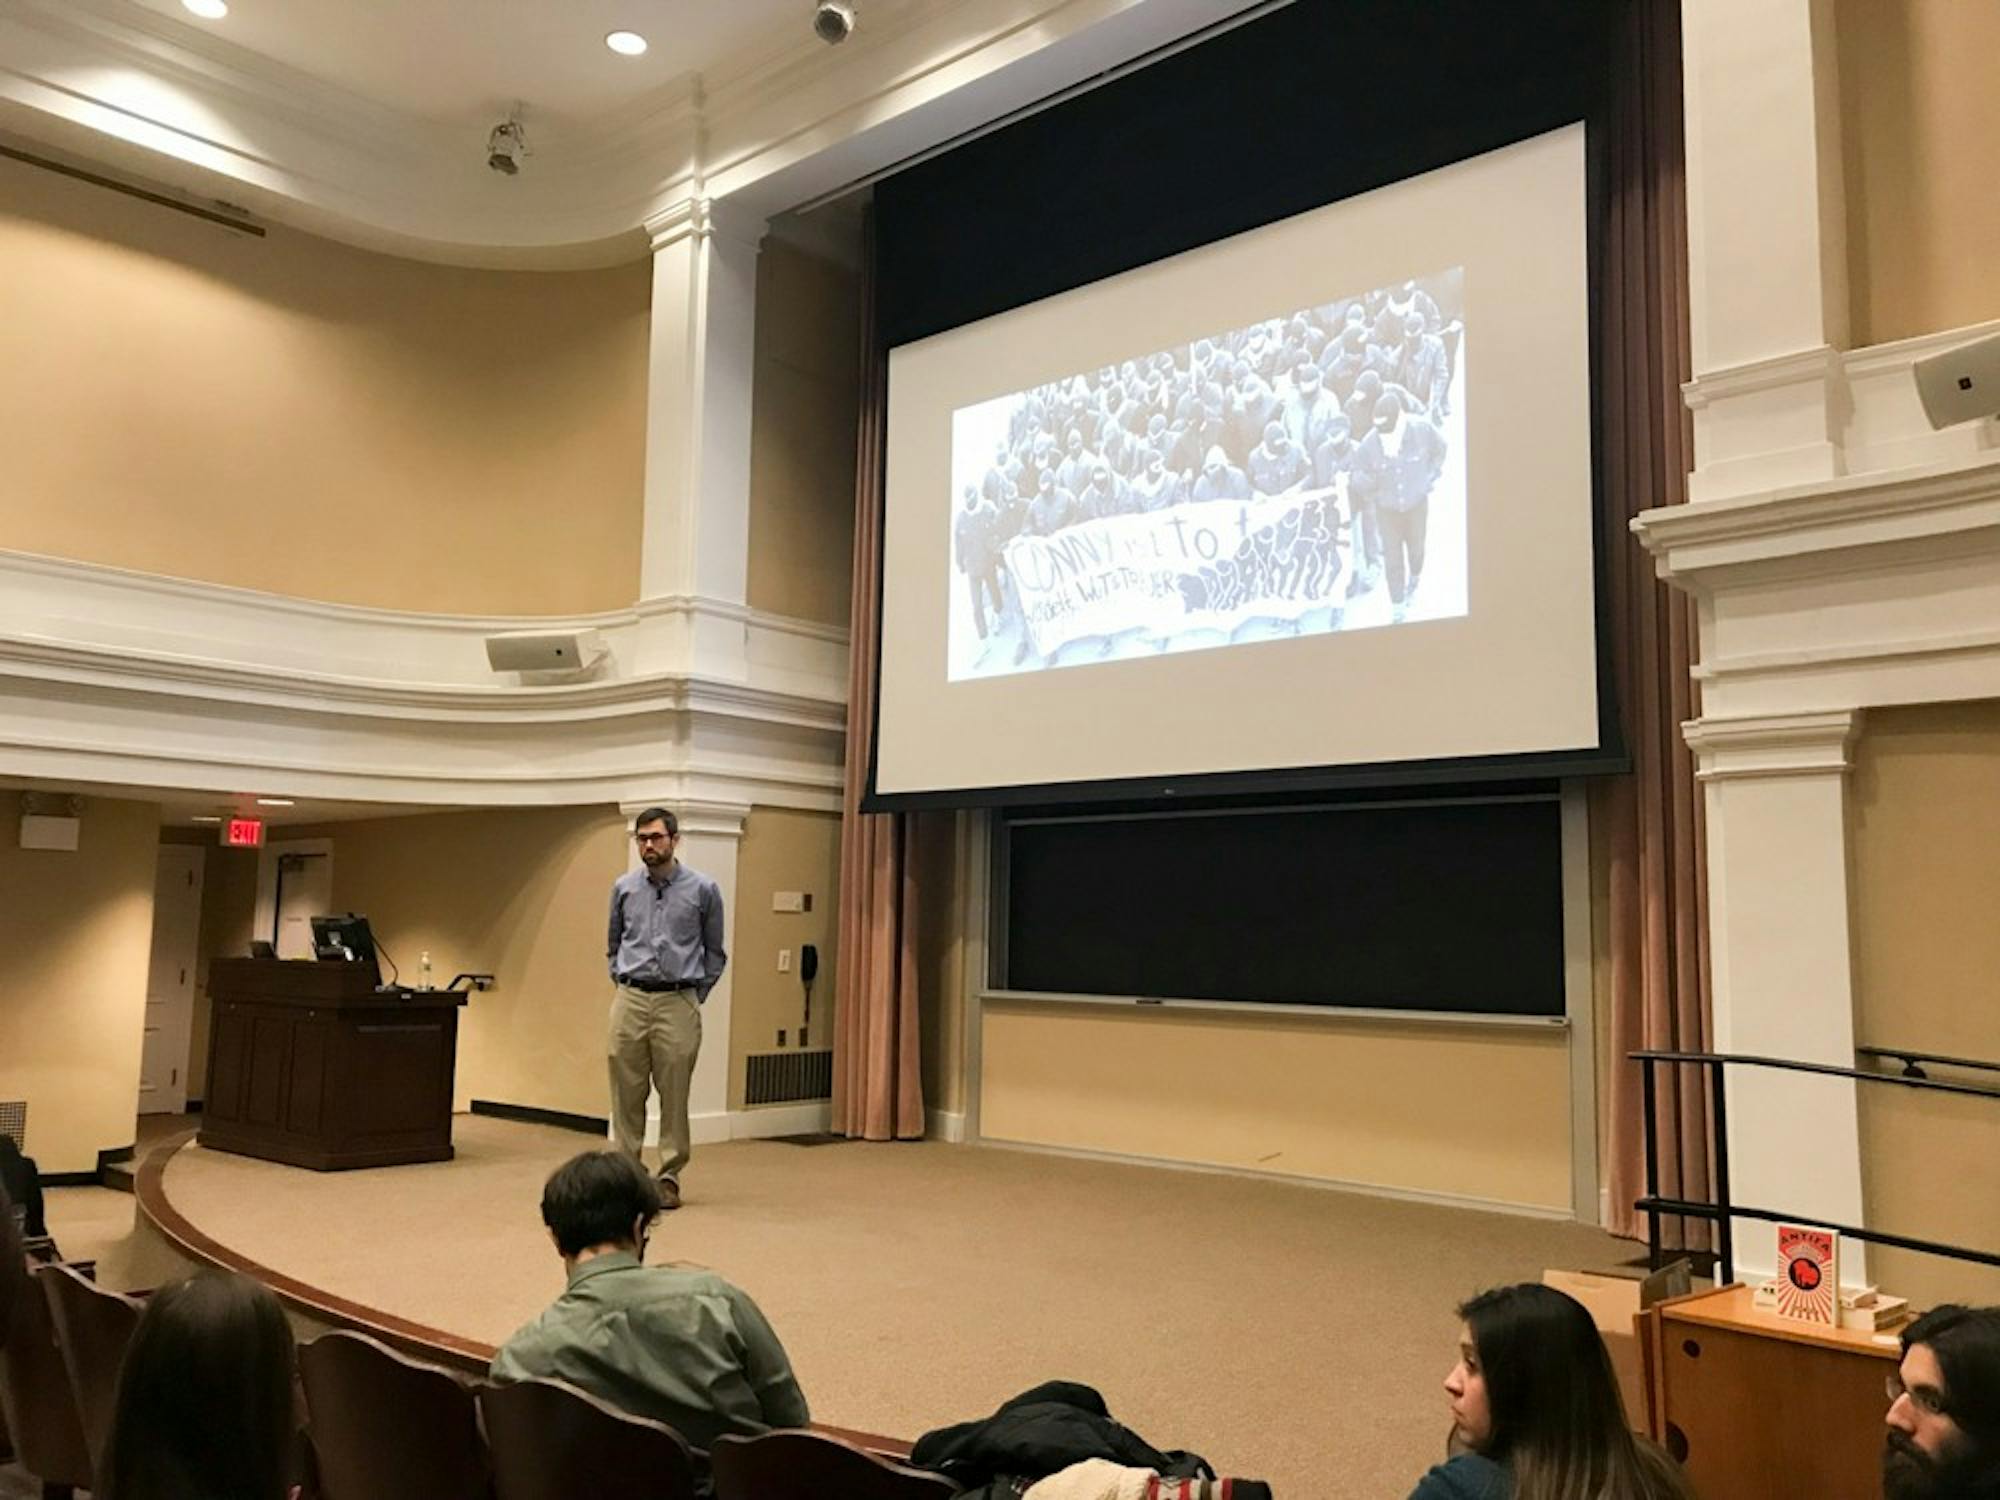 Anti-fascism scholar and history professor Mark Bray gave a talk on Thursday in Dartmouth Hall.